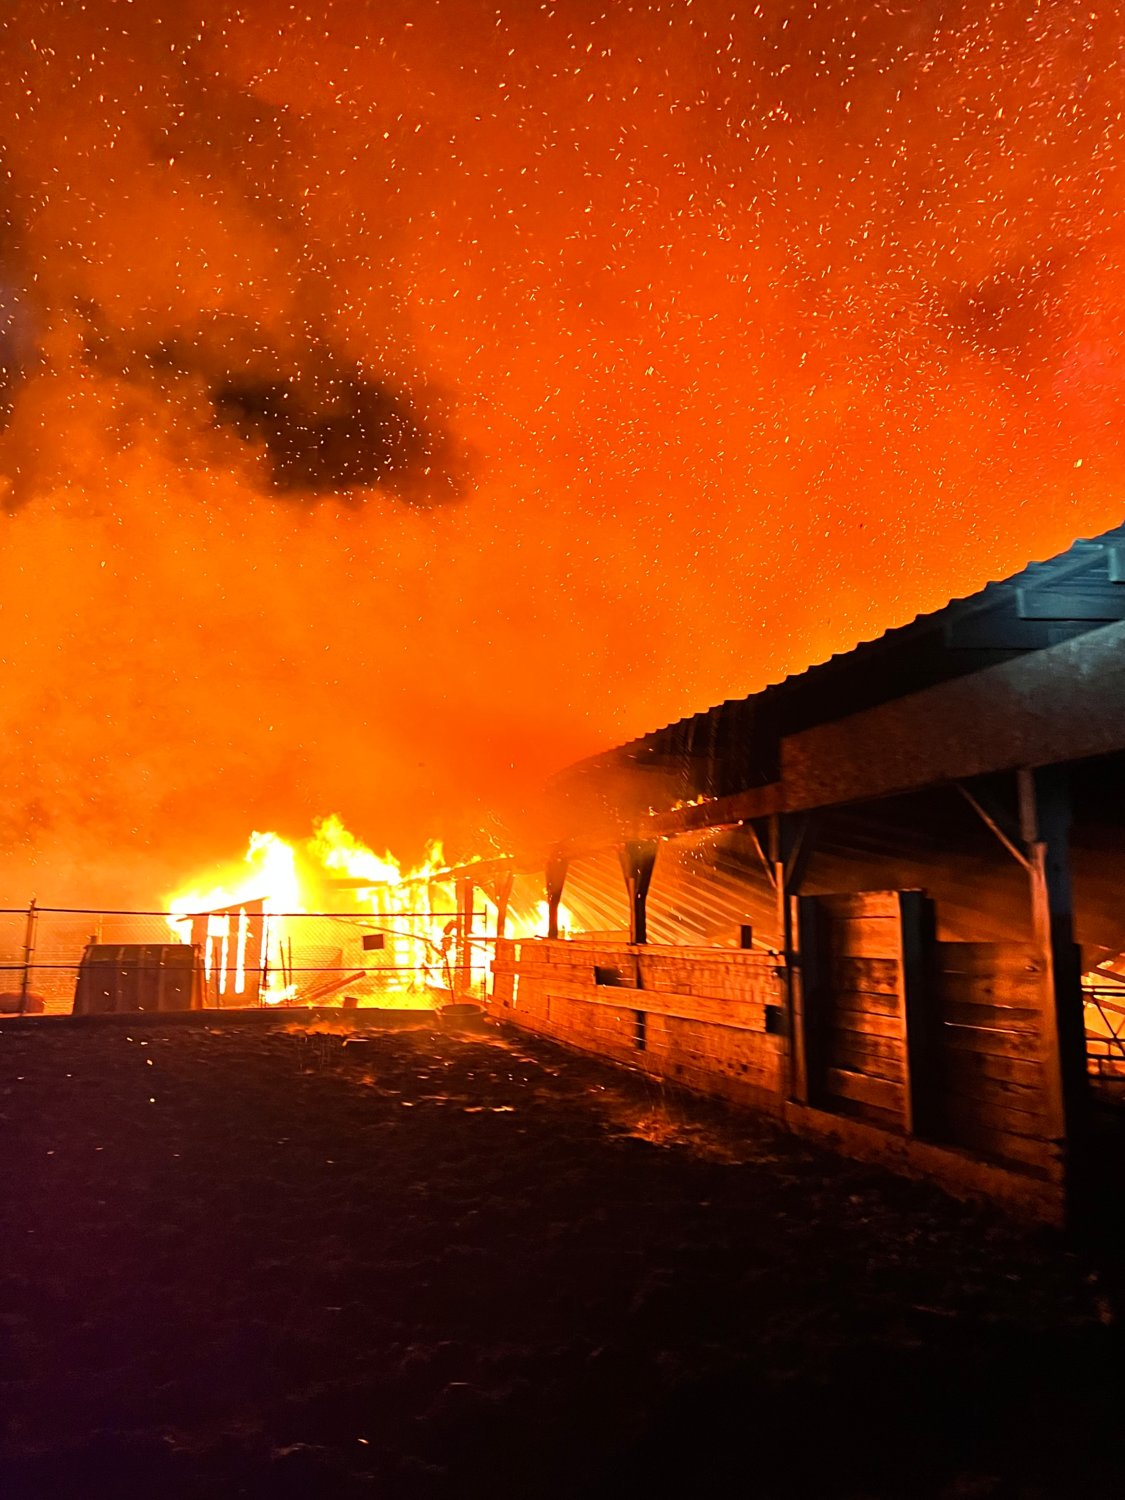 A barn seen fully ablaze on Barton Avenue in Touisset on Saturday night brought out around 40 Warren firefighters and apparatus from Swansea, Rehoboth, and Westport. No humans were injured in the fire.